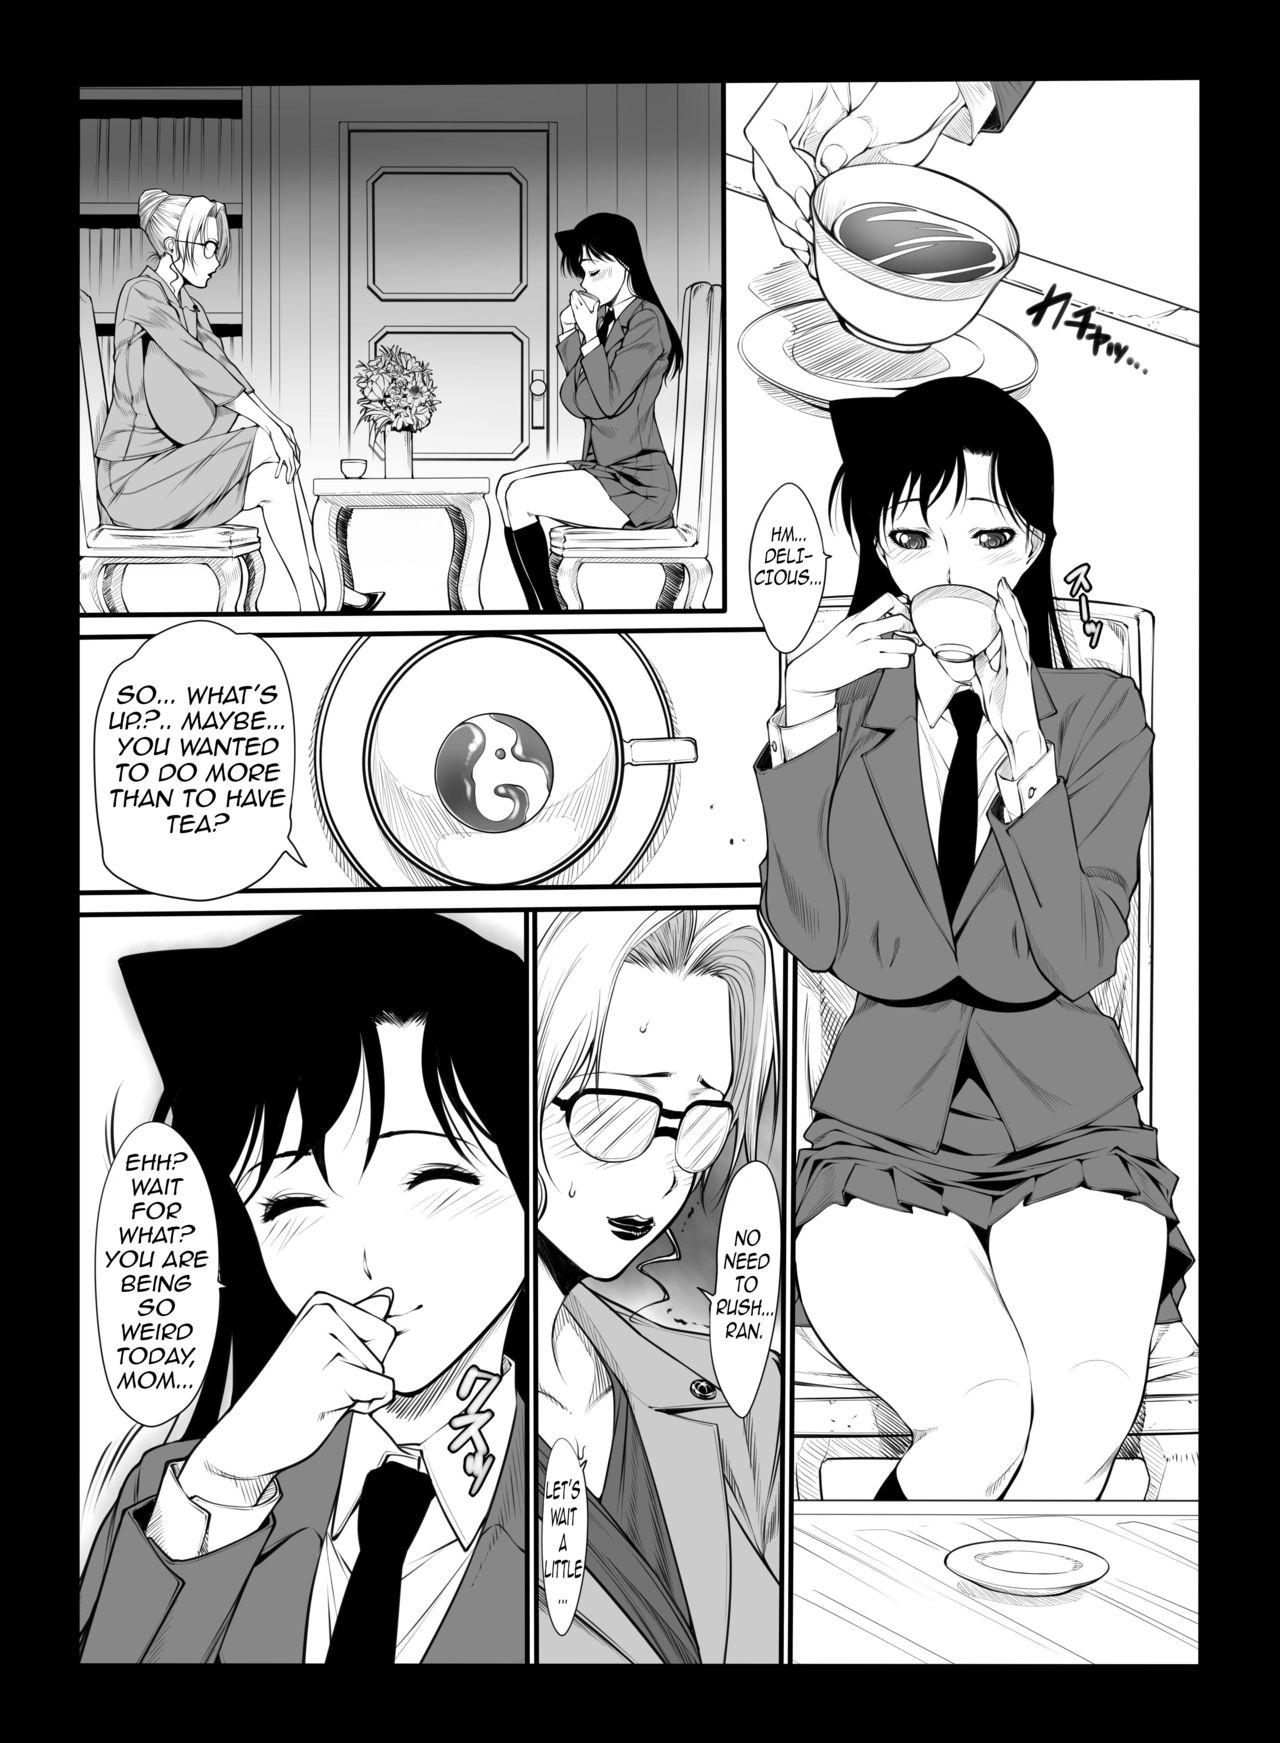 The Incestuous Daily Life of Ms. Kisaki 1